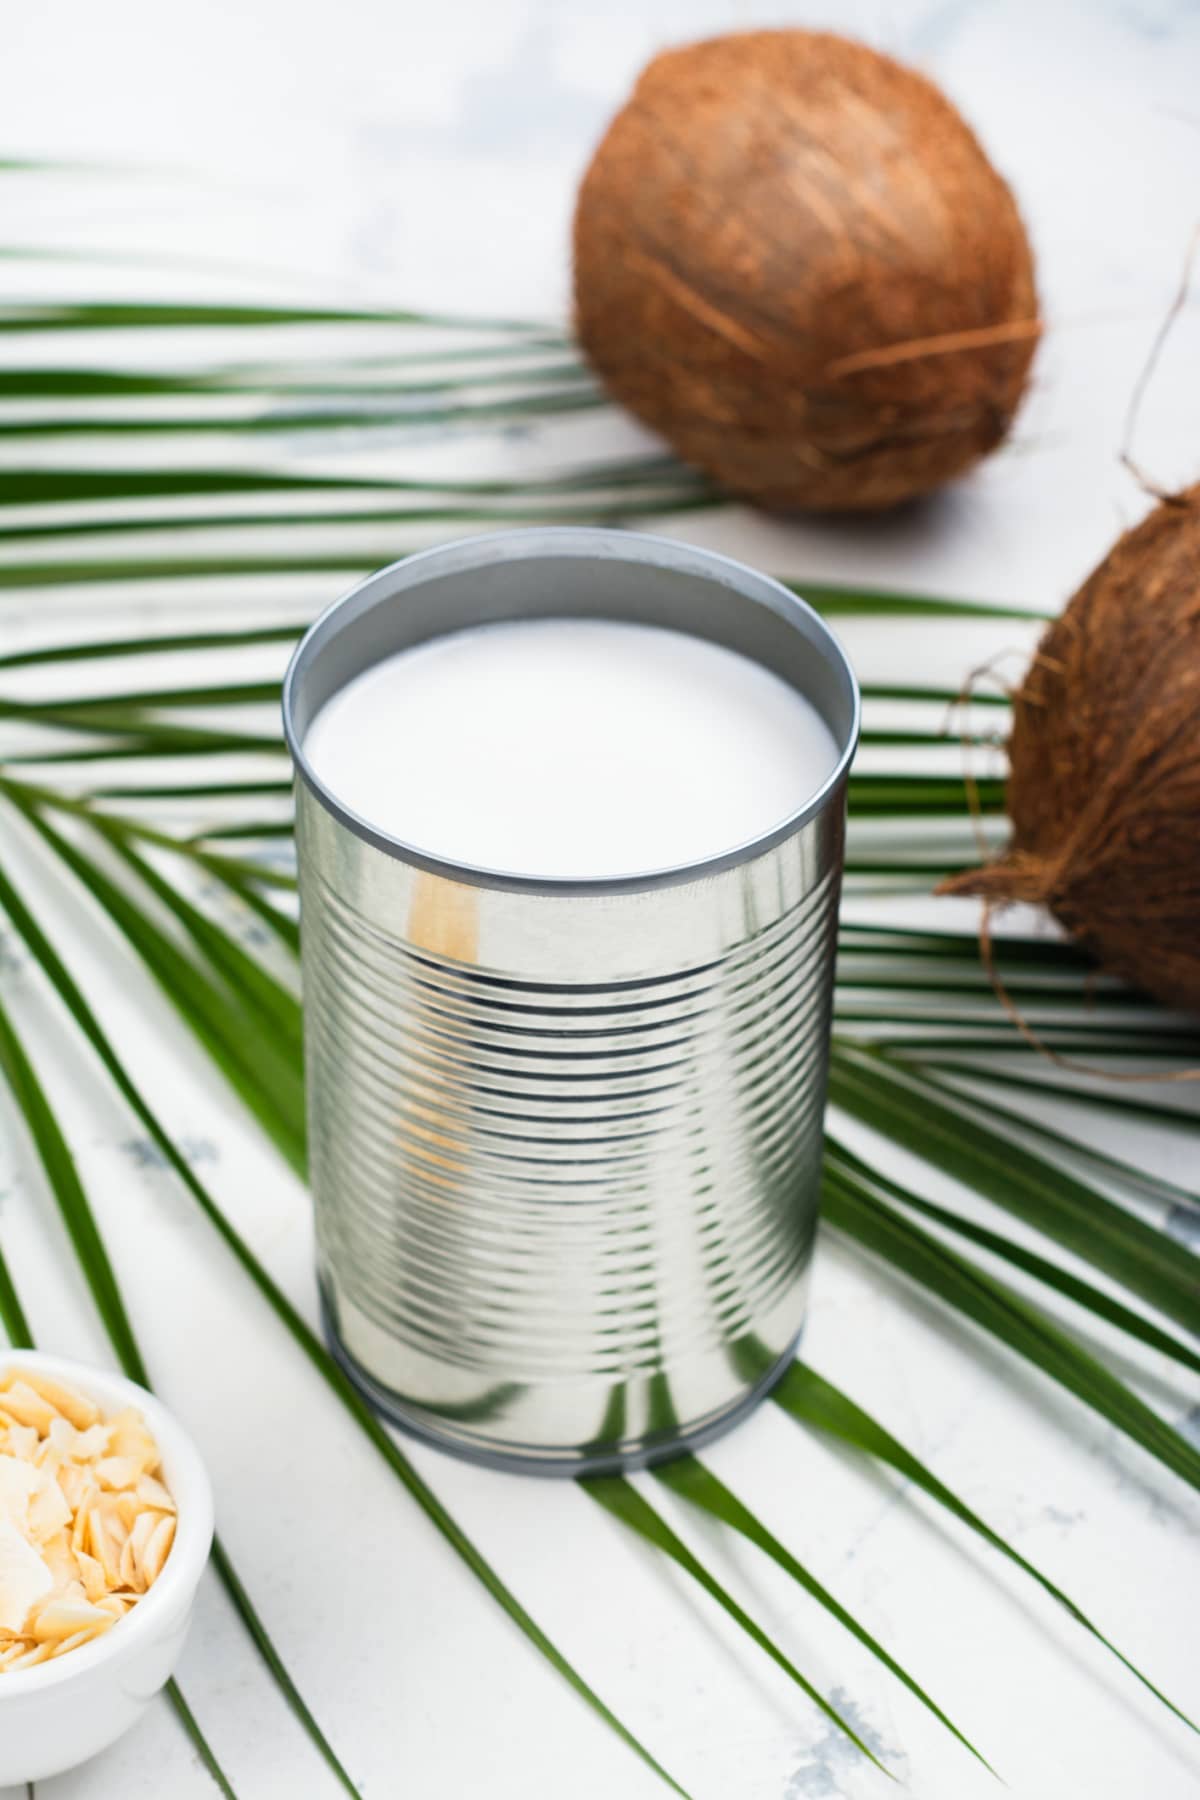 Opened tin can with coconut milk drink. Alternative non dairy vegan milk on white stone table